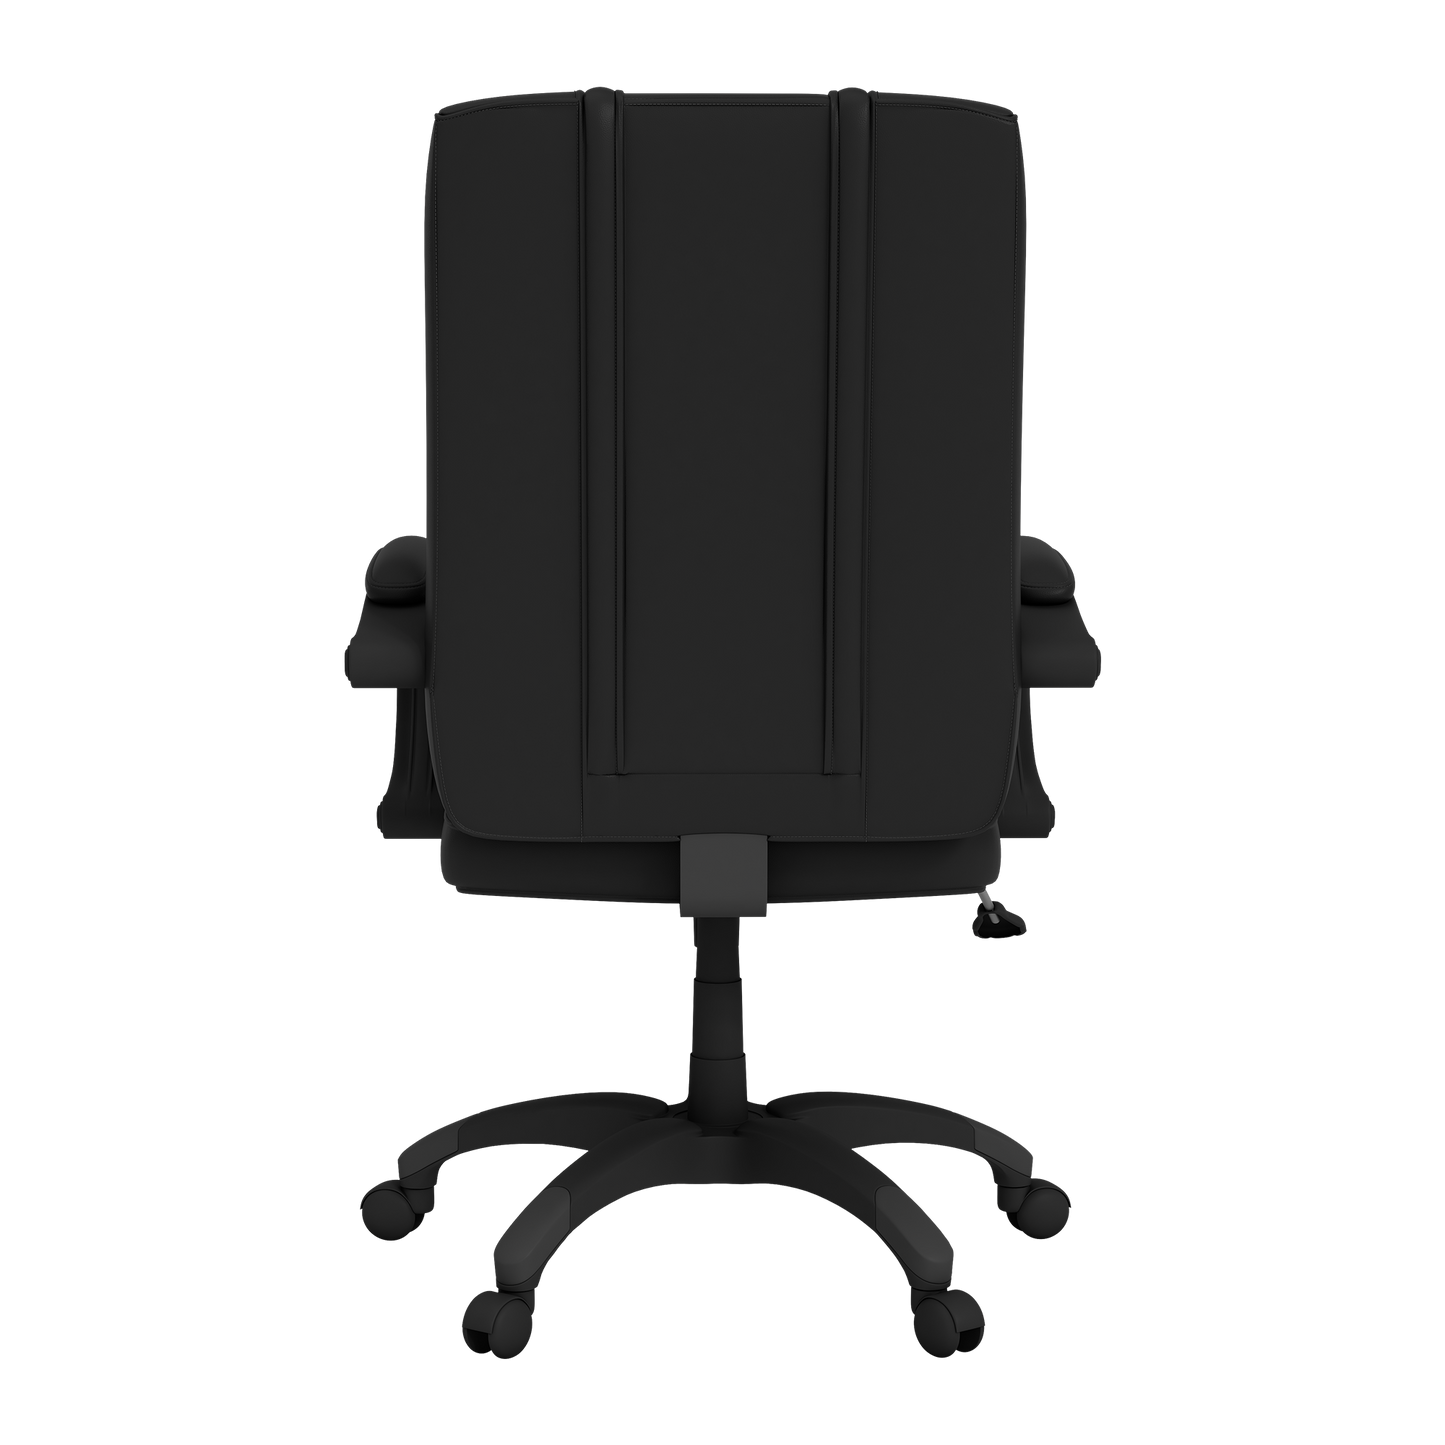 Office Chair 1000 with Seattle Mariners Logo